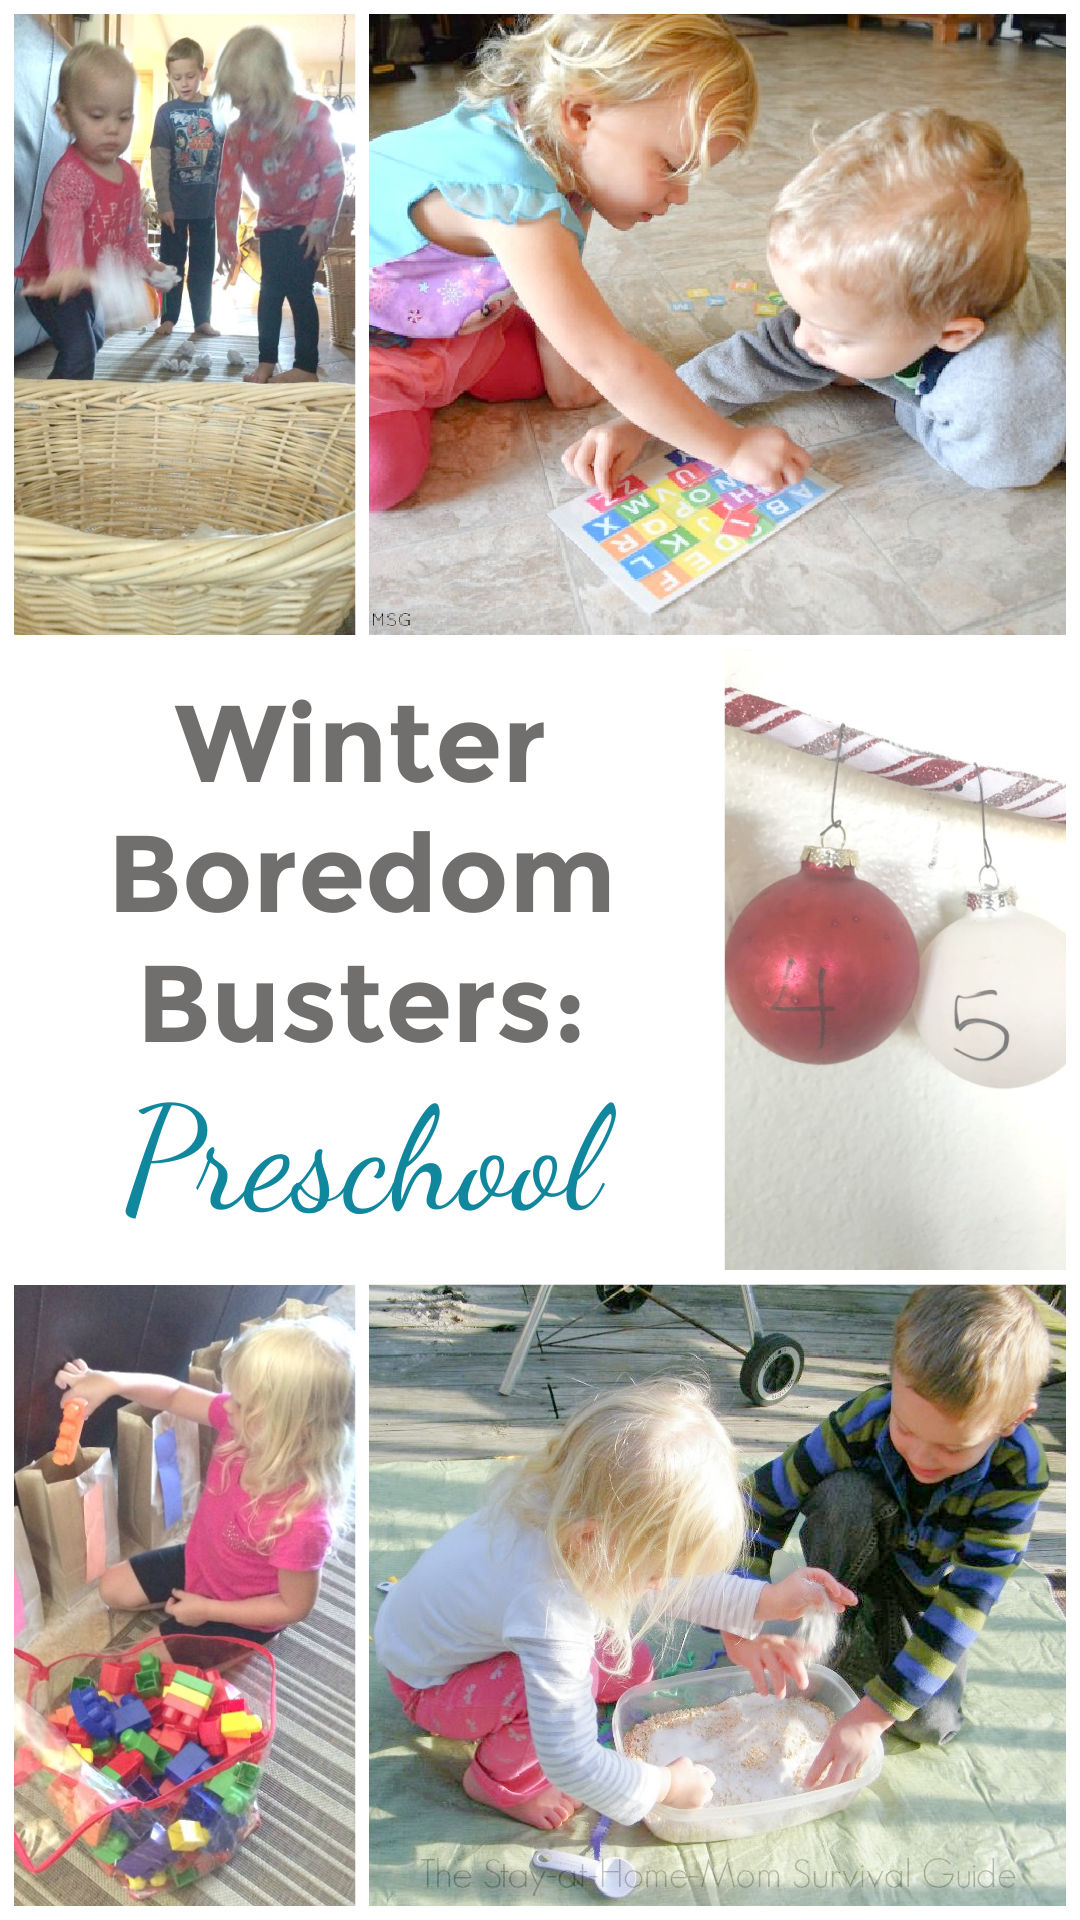 This list of winter boredom busters for preschool kids is a must have for the indoor days when it is too cold to play outside.